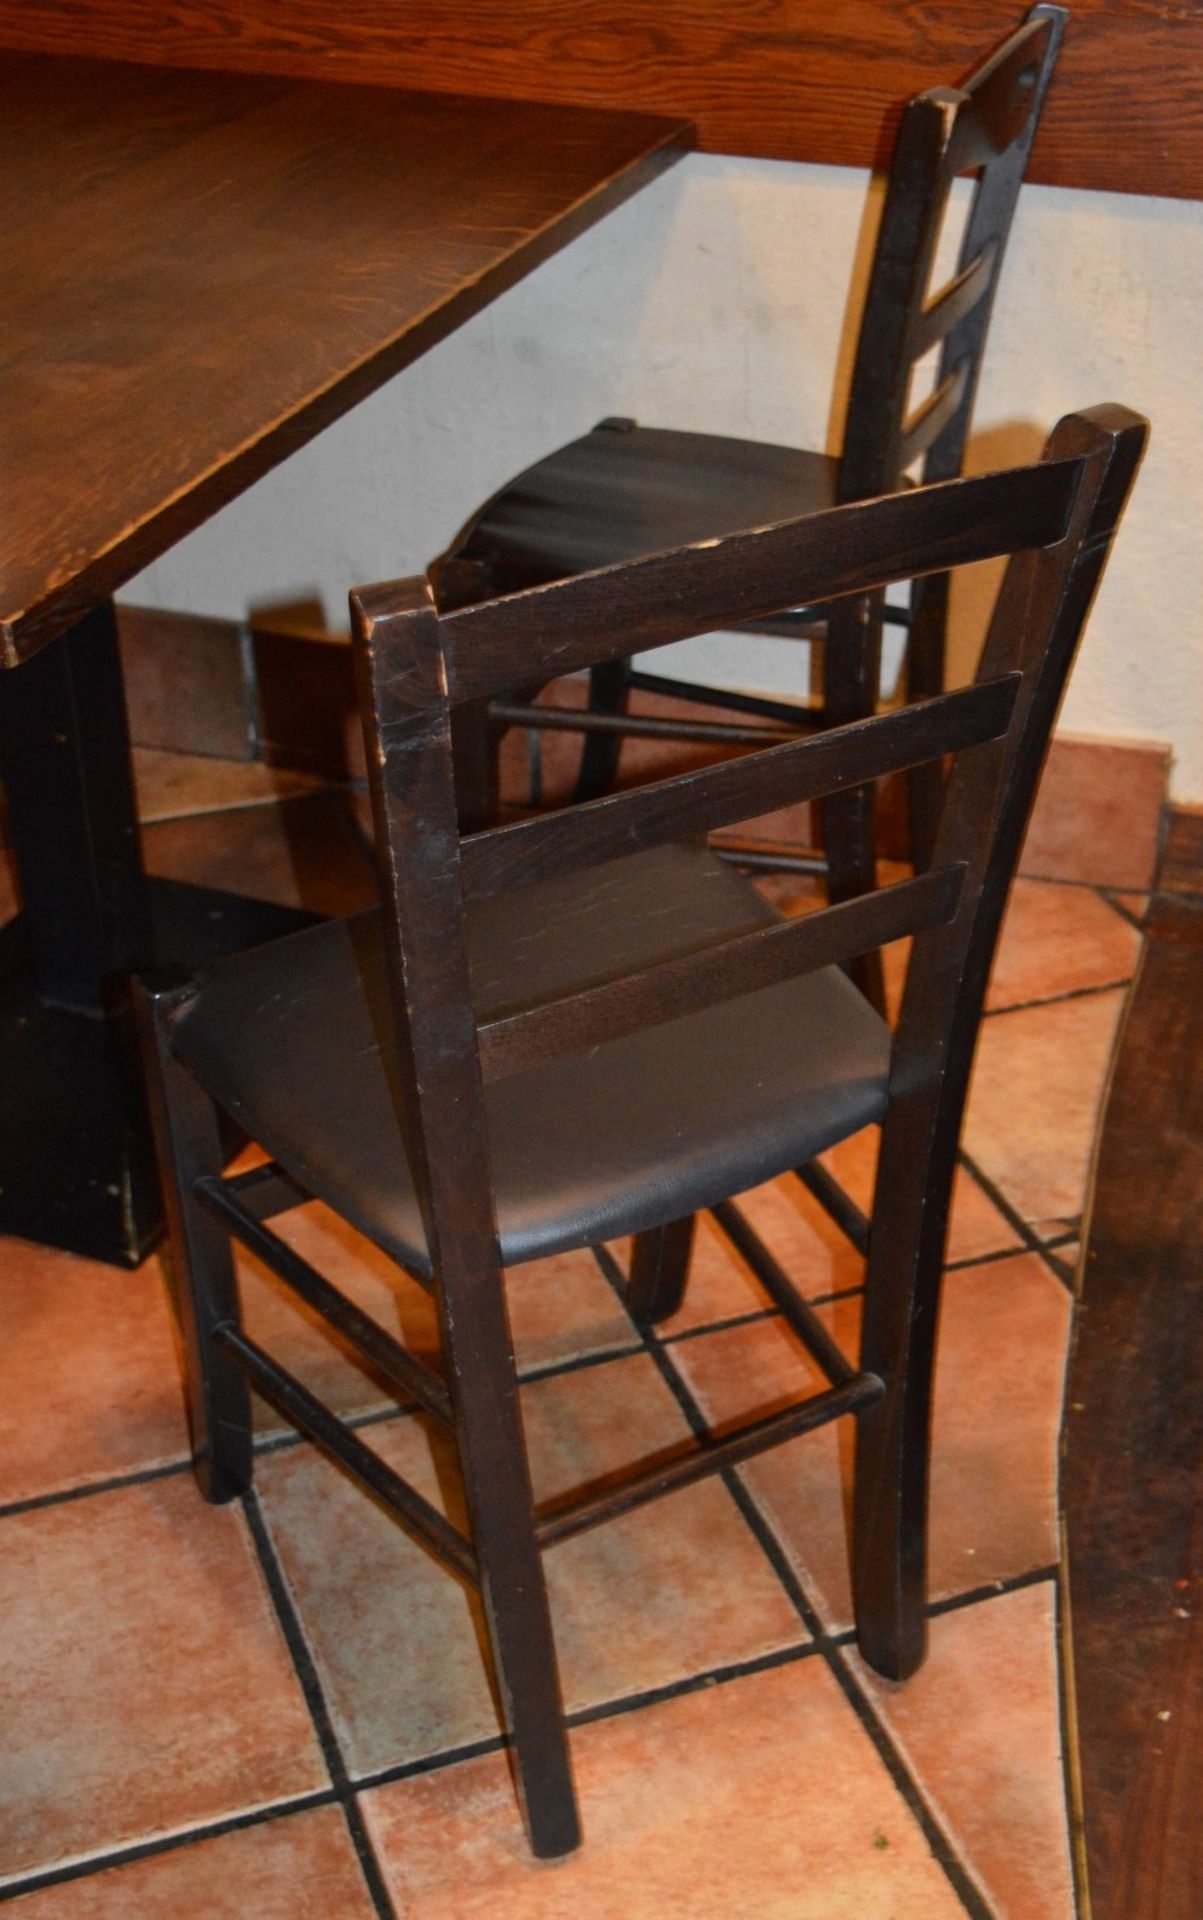 10 x Assorted Rustic Restaurant Dining Chairs - Taken From A Popular Eatery - Manchester M17 - Image 4 of 6